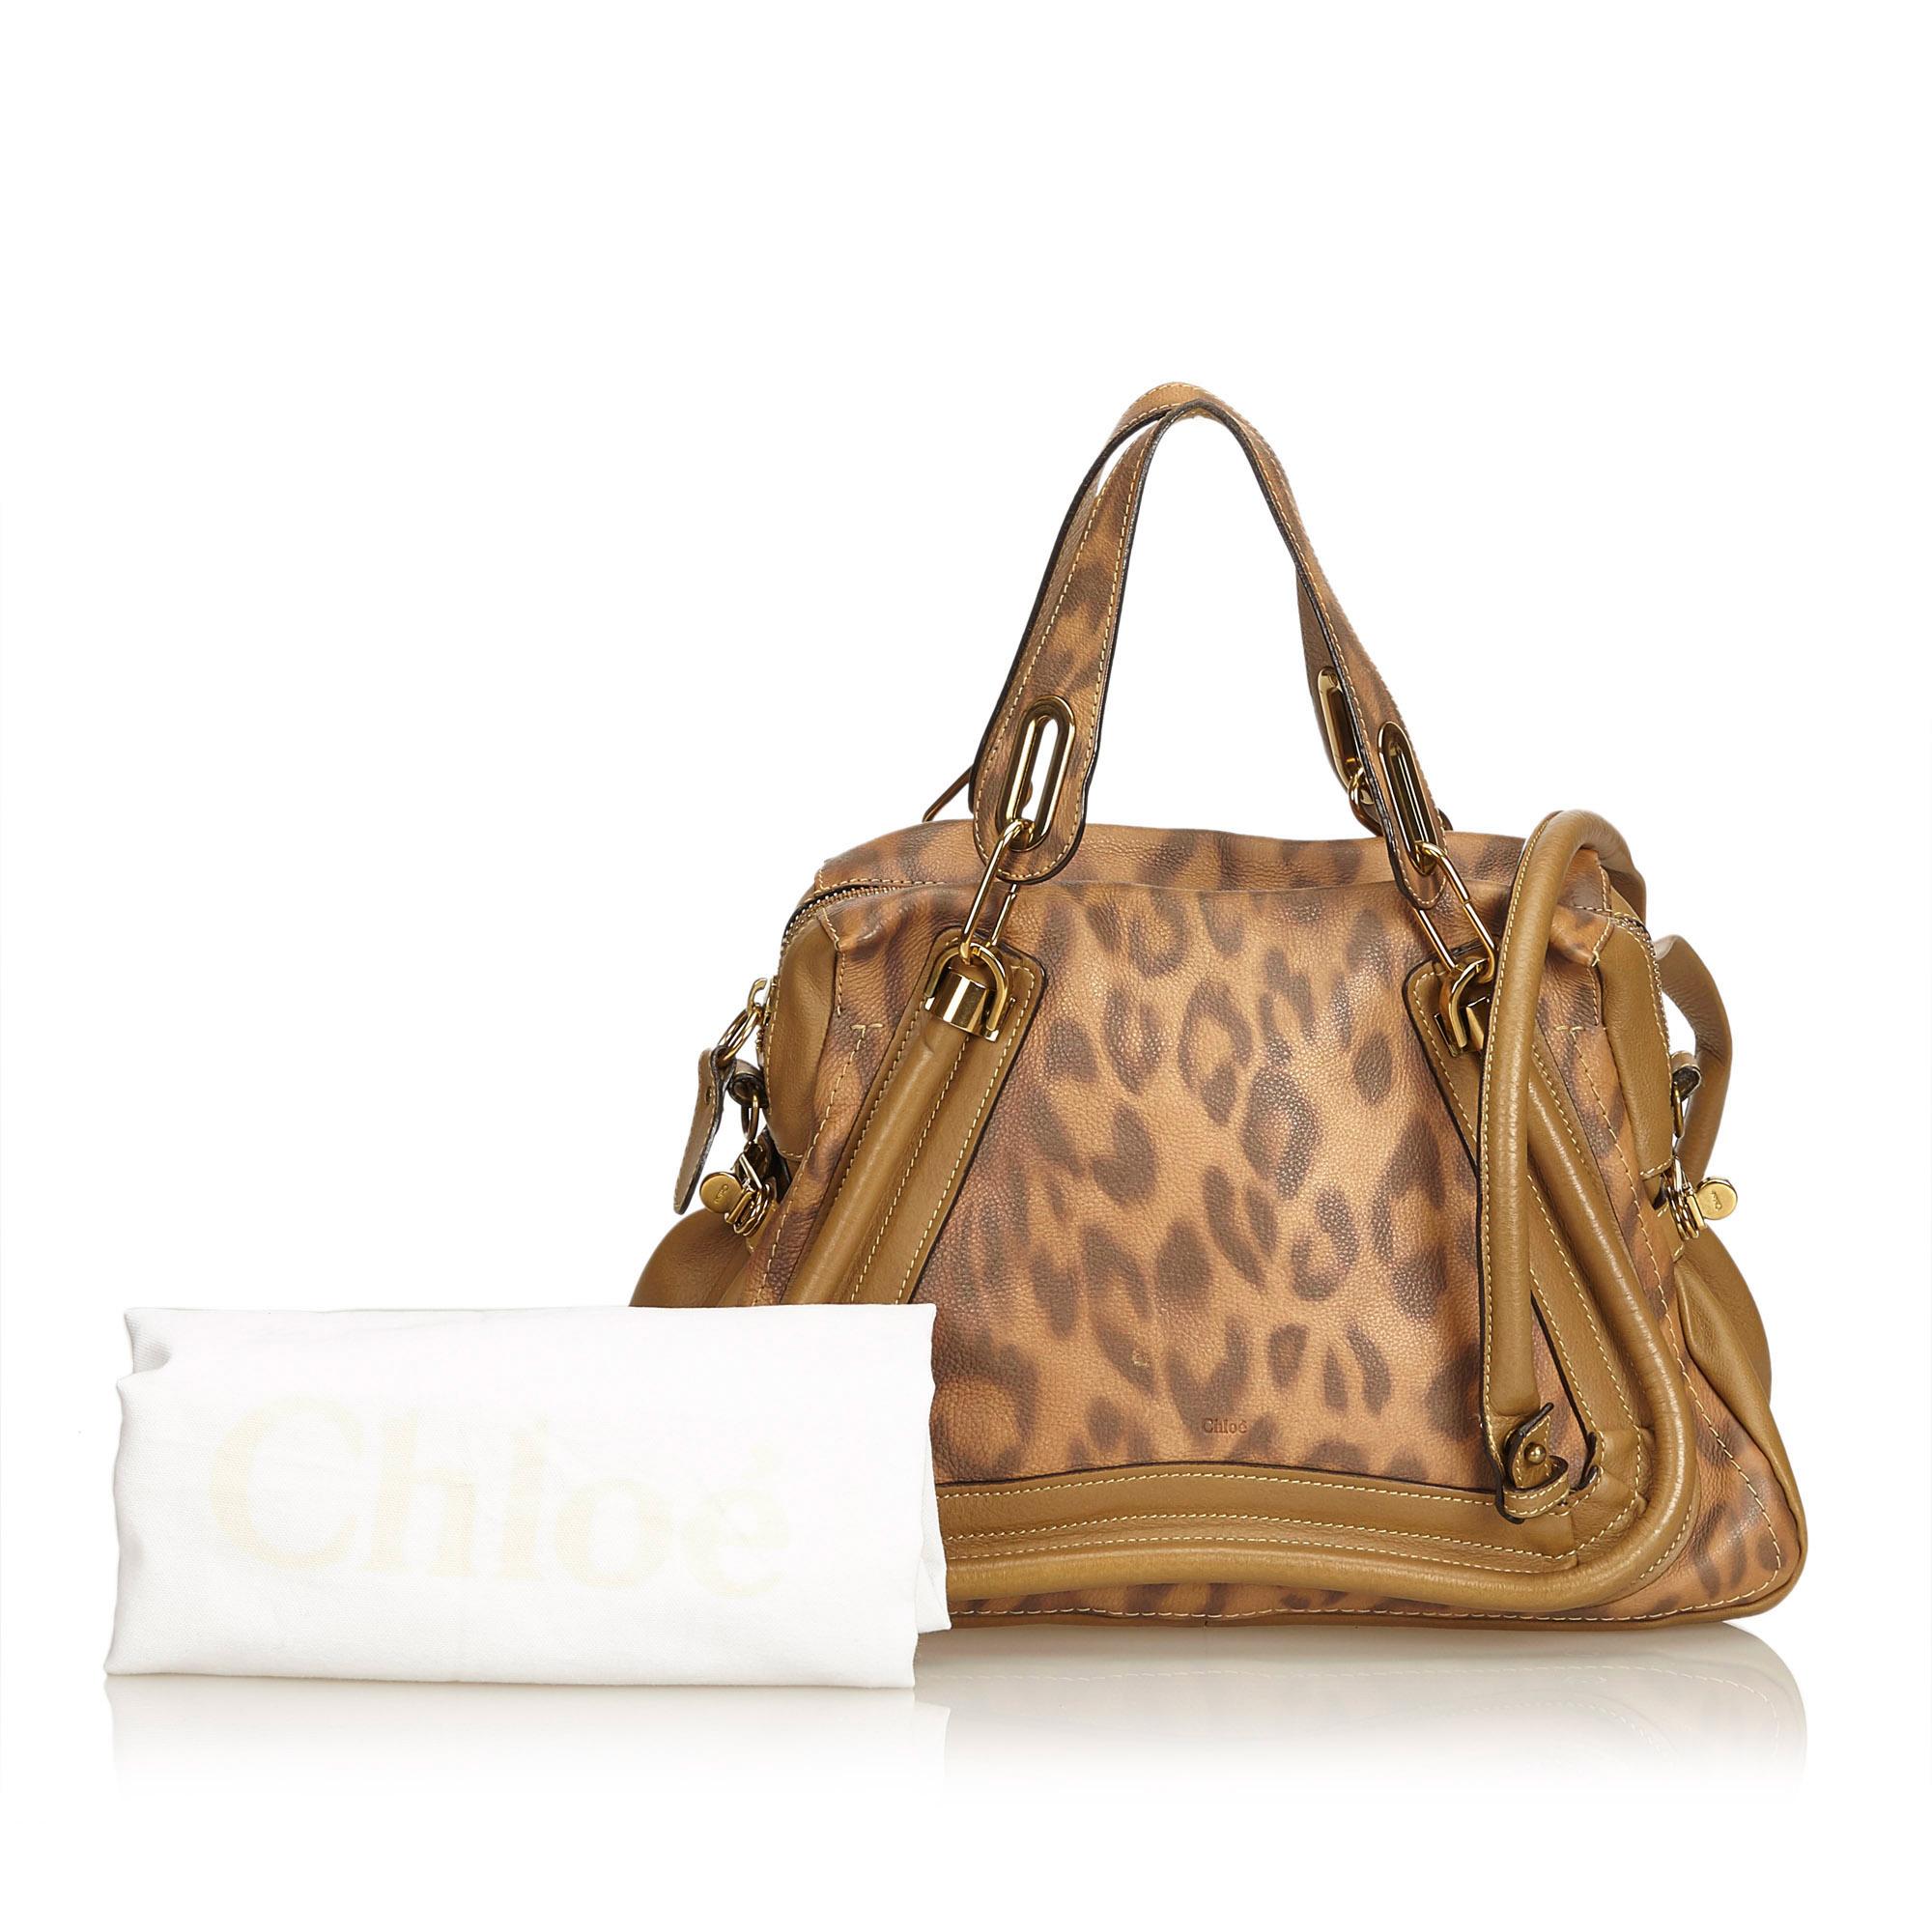 Chloe Brown Leopard-Printed Leather Paraty 6